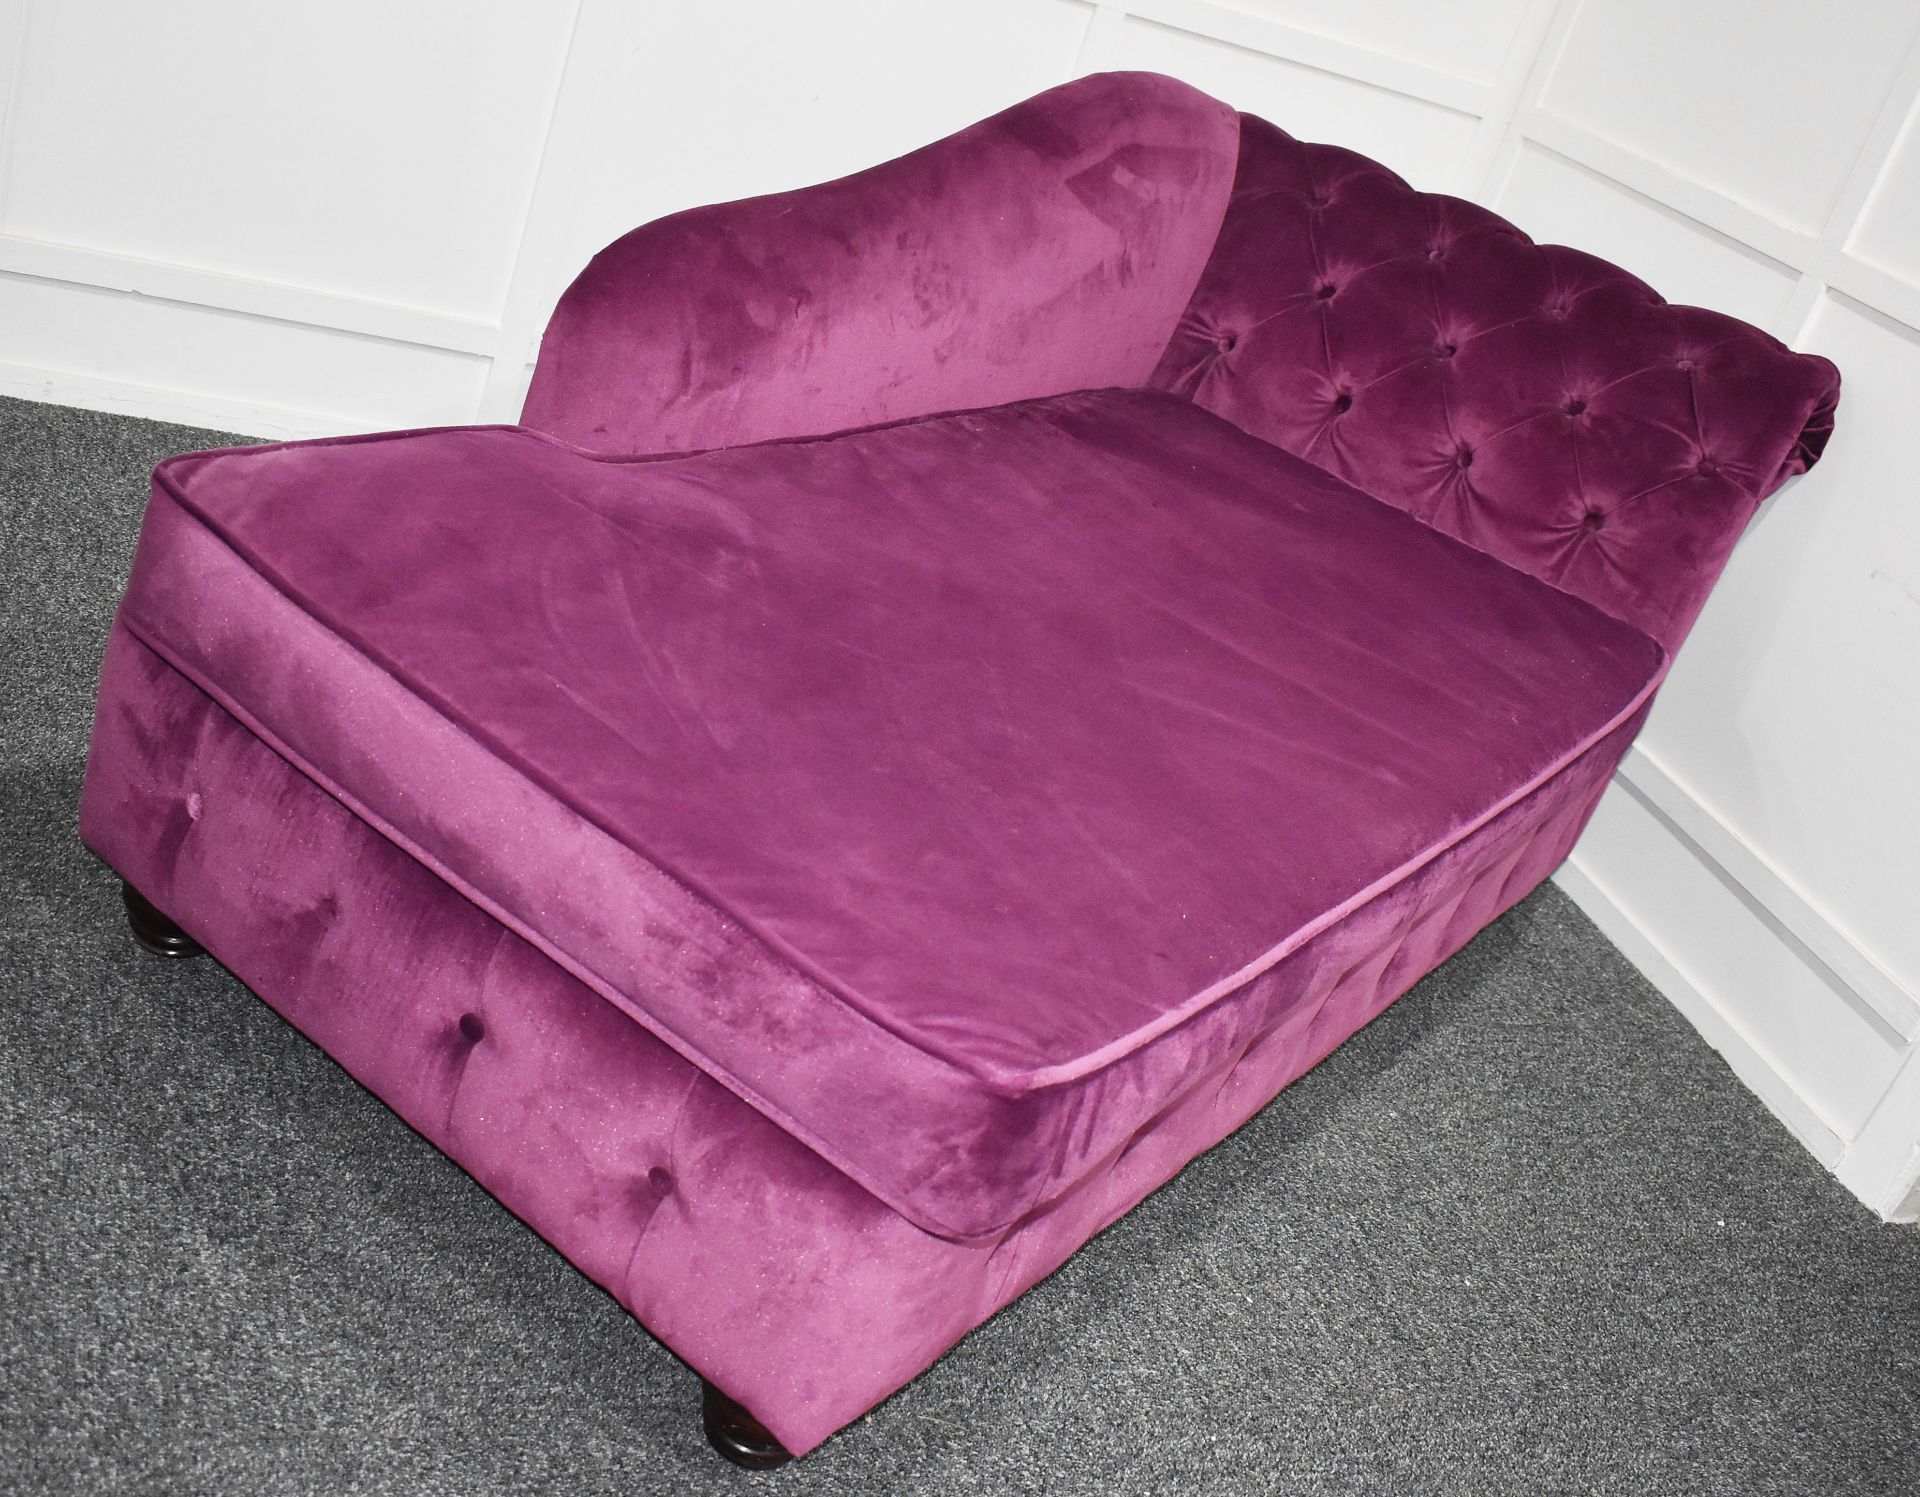 1 x Elegant Chesterfield-style Button-back Chaise Lounge, Richly Upholstered in a Mulberry - Image 4 of 10